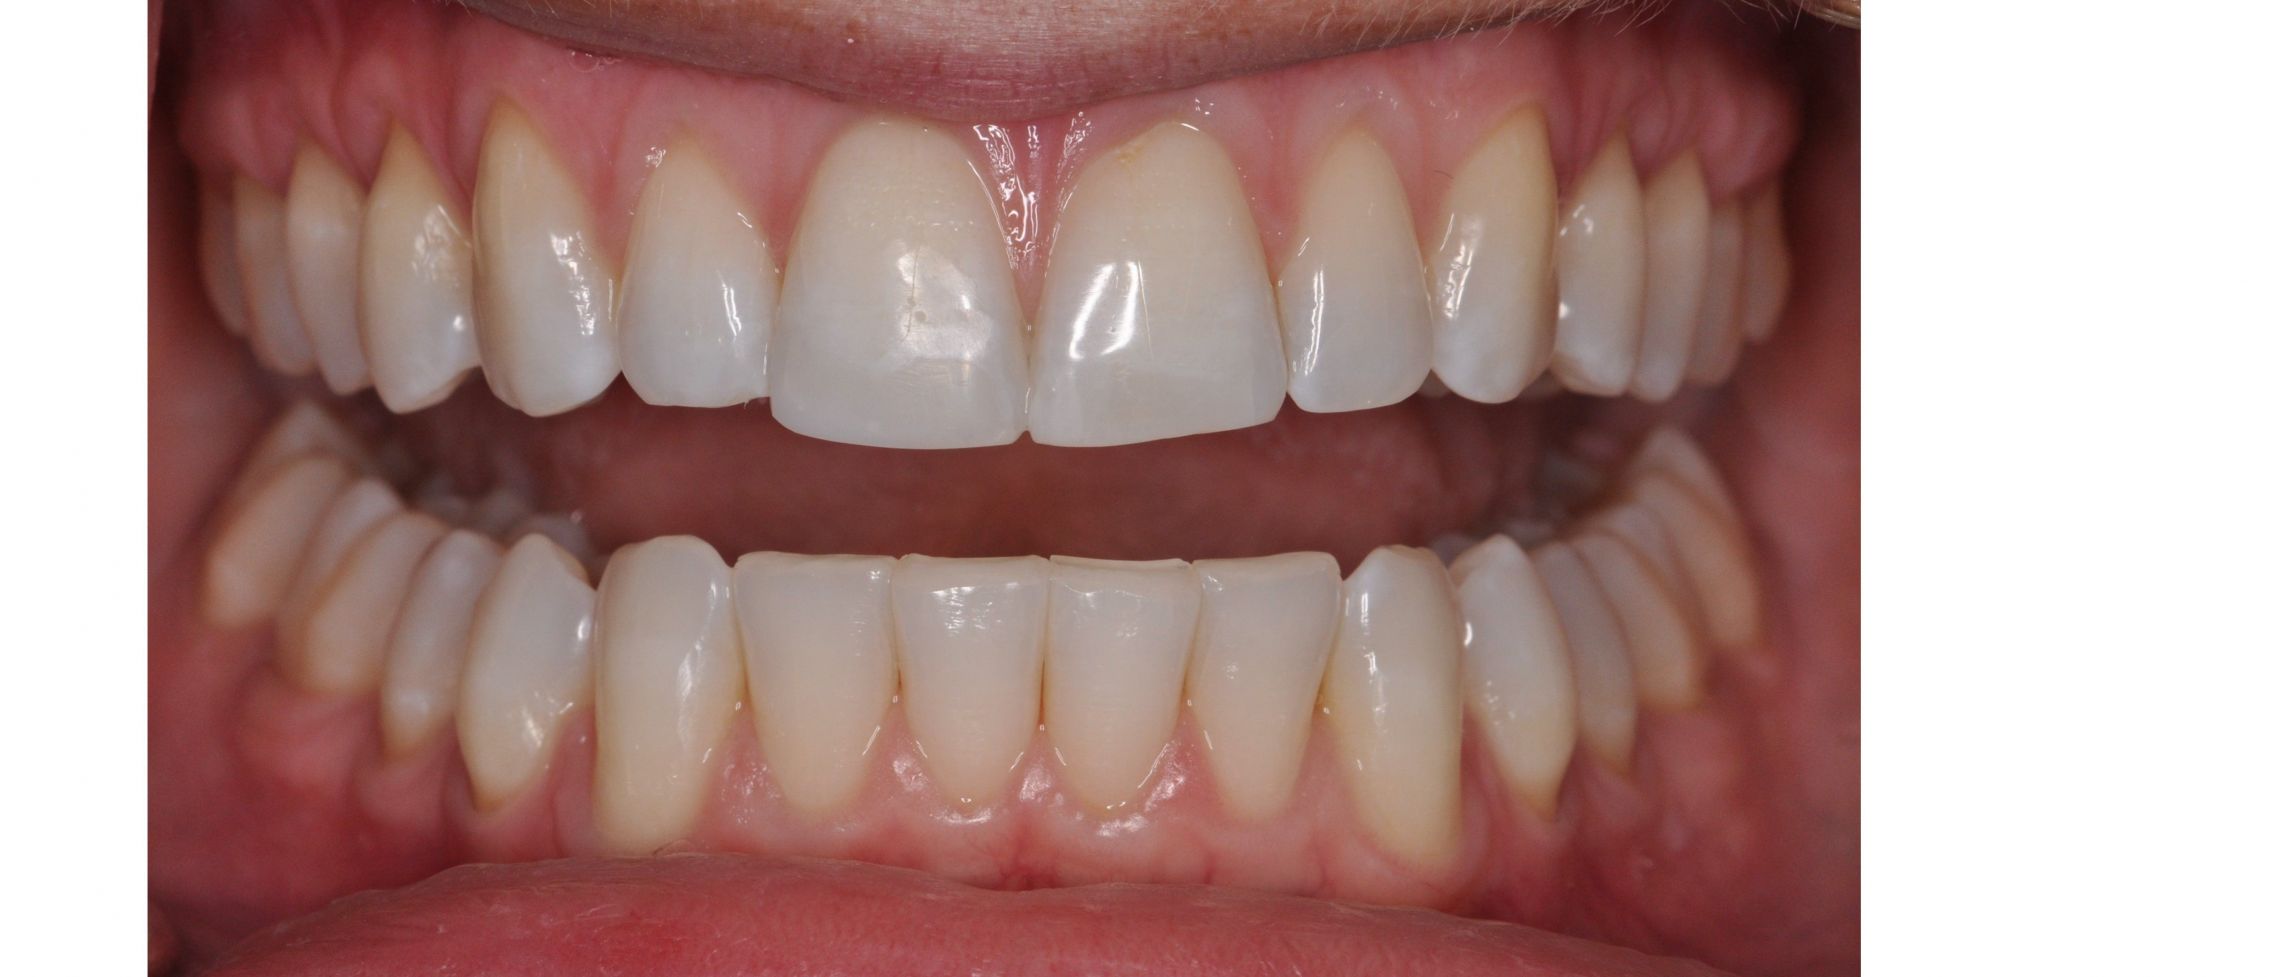 After Invisalign, free whitening and bonding.